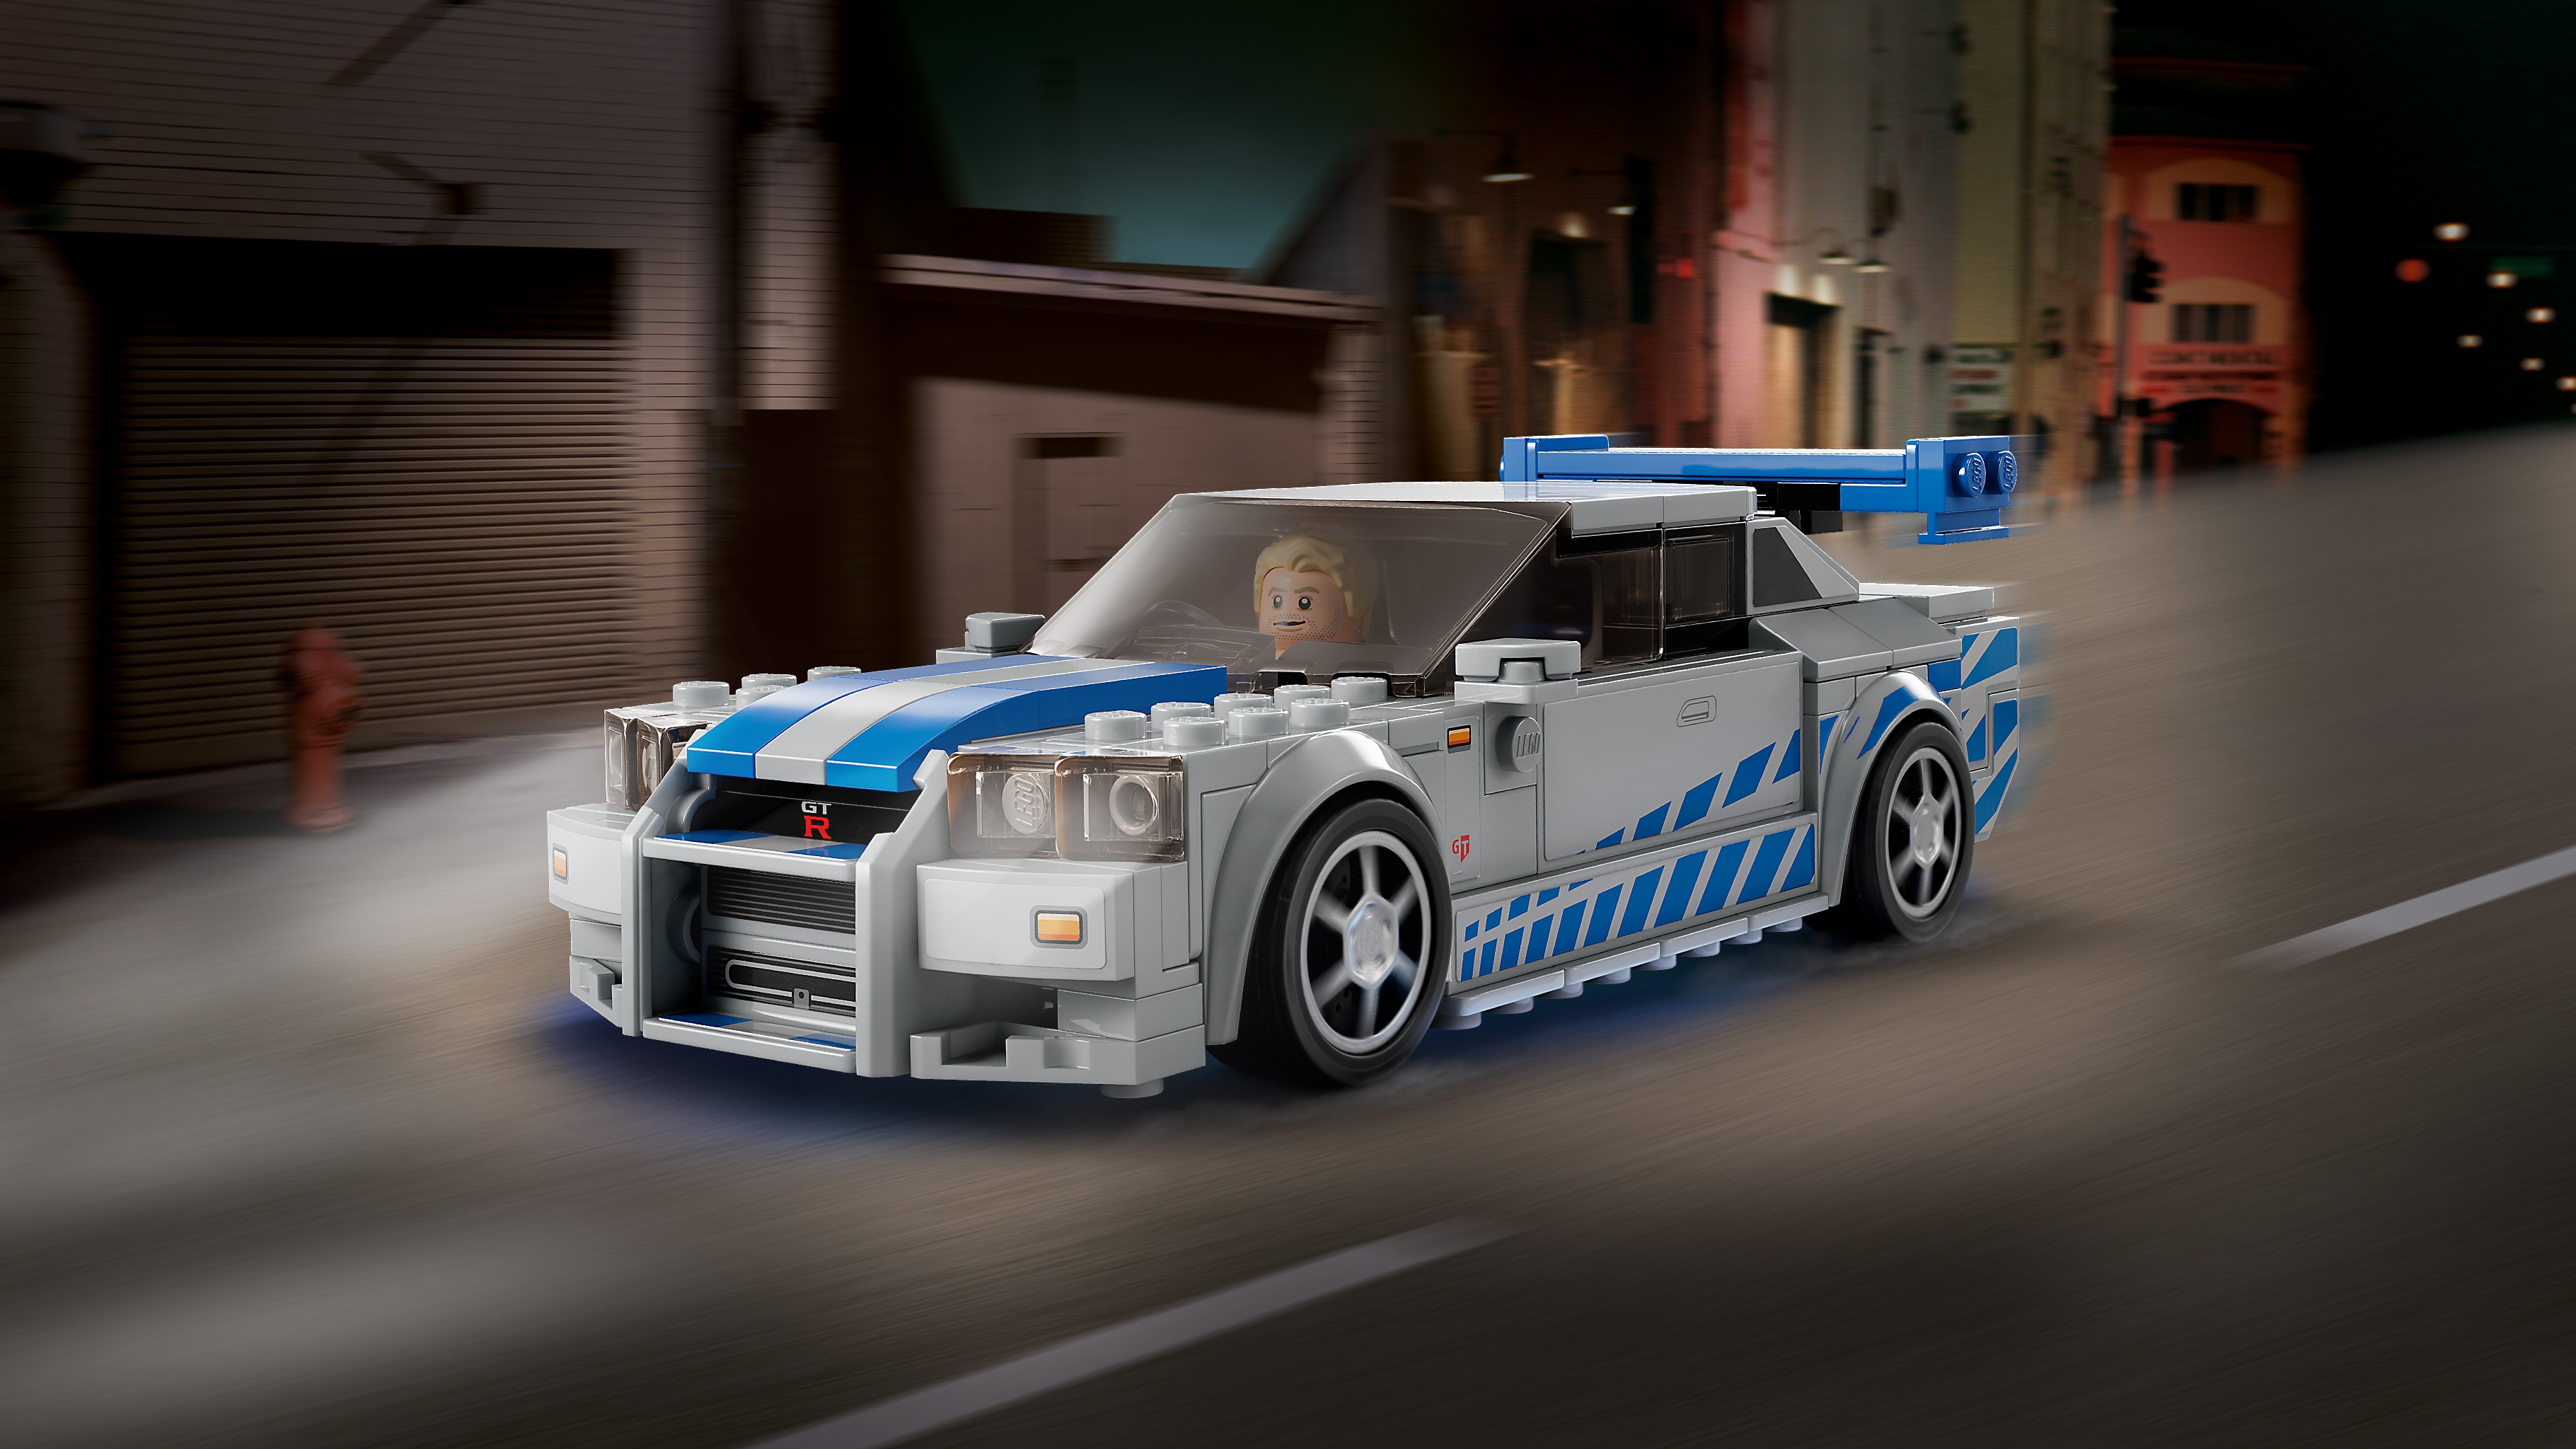 2 Fast 2 Furious Nissan Skyline GT-R (R34) 76917 - LEGO® Speed Champions  Sets -  for kids